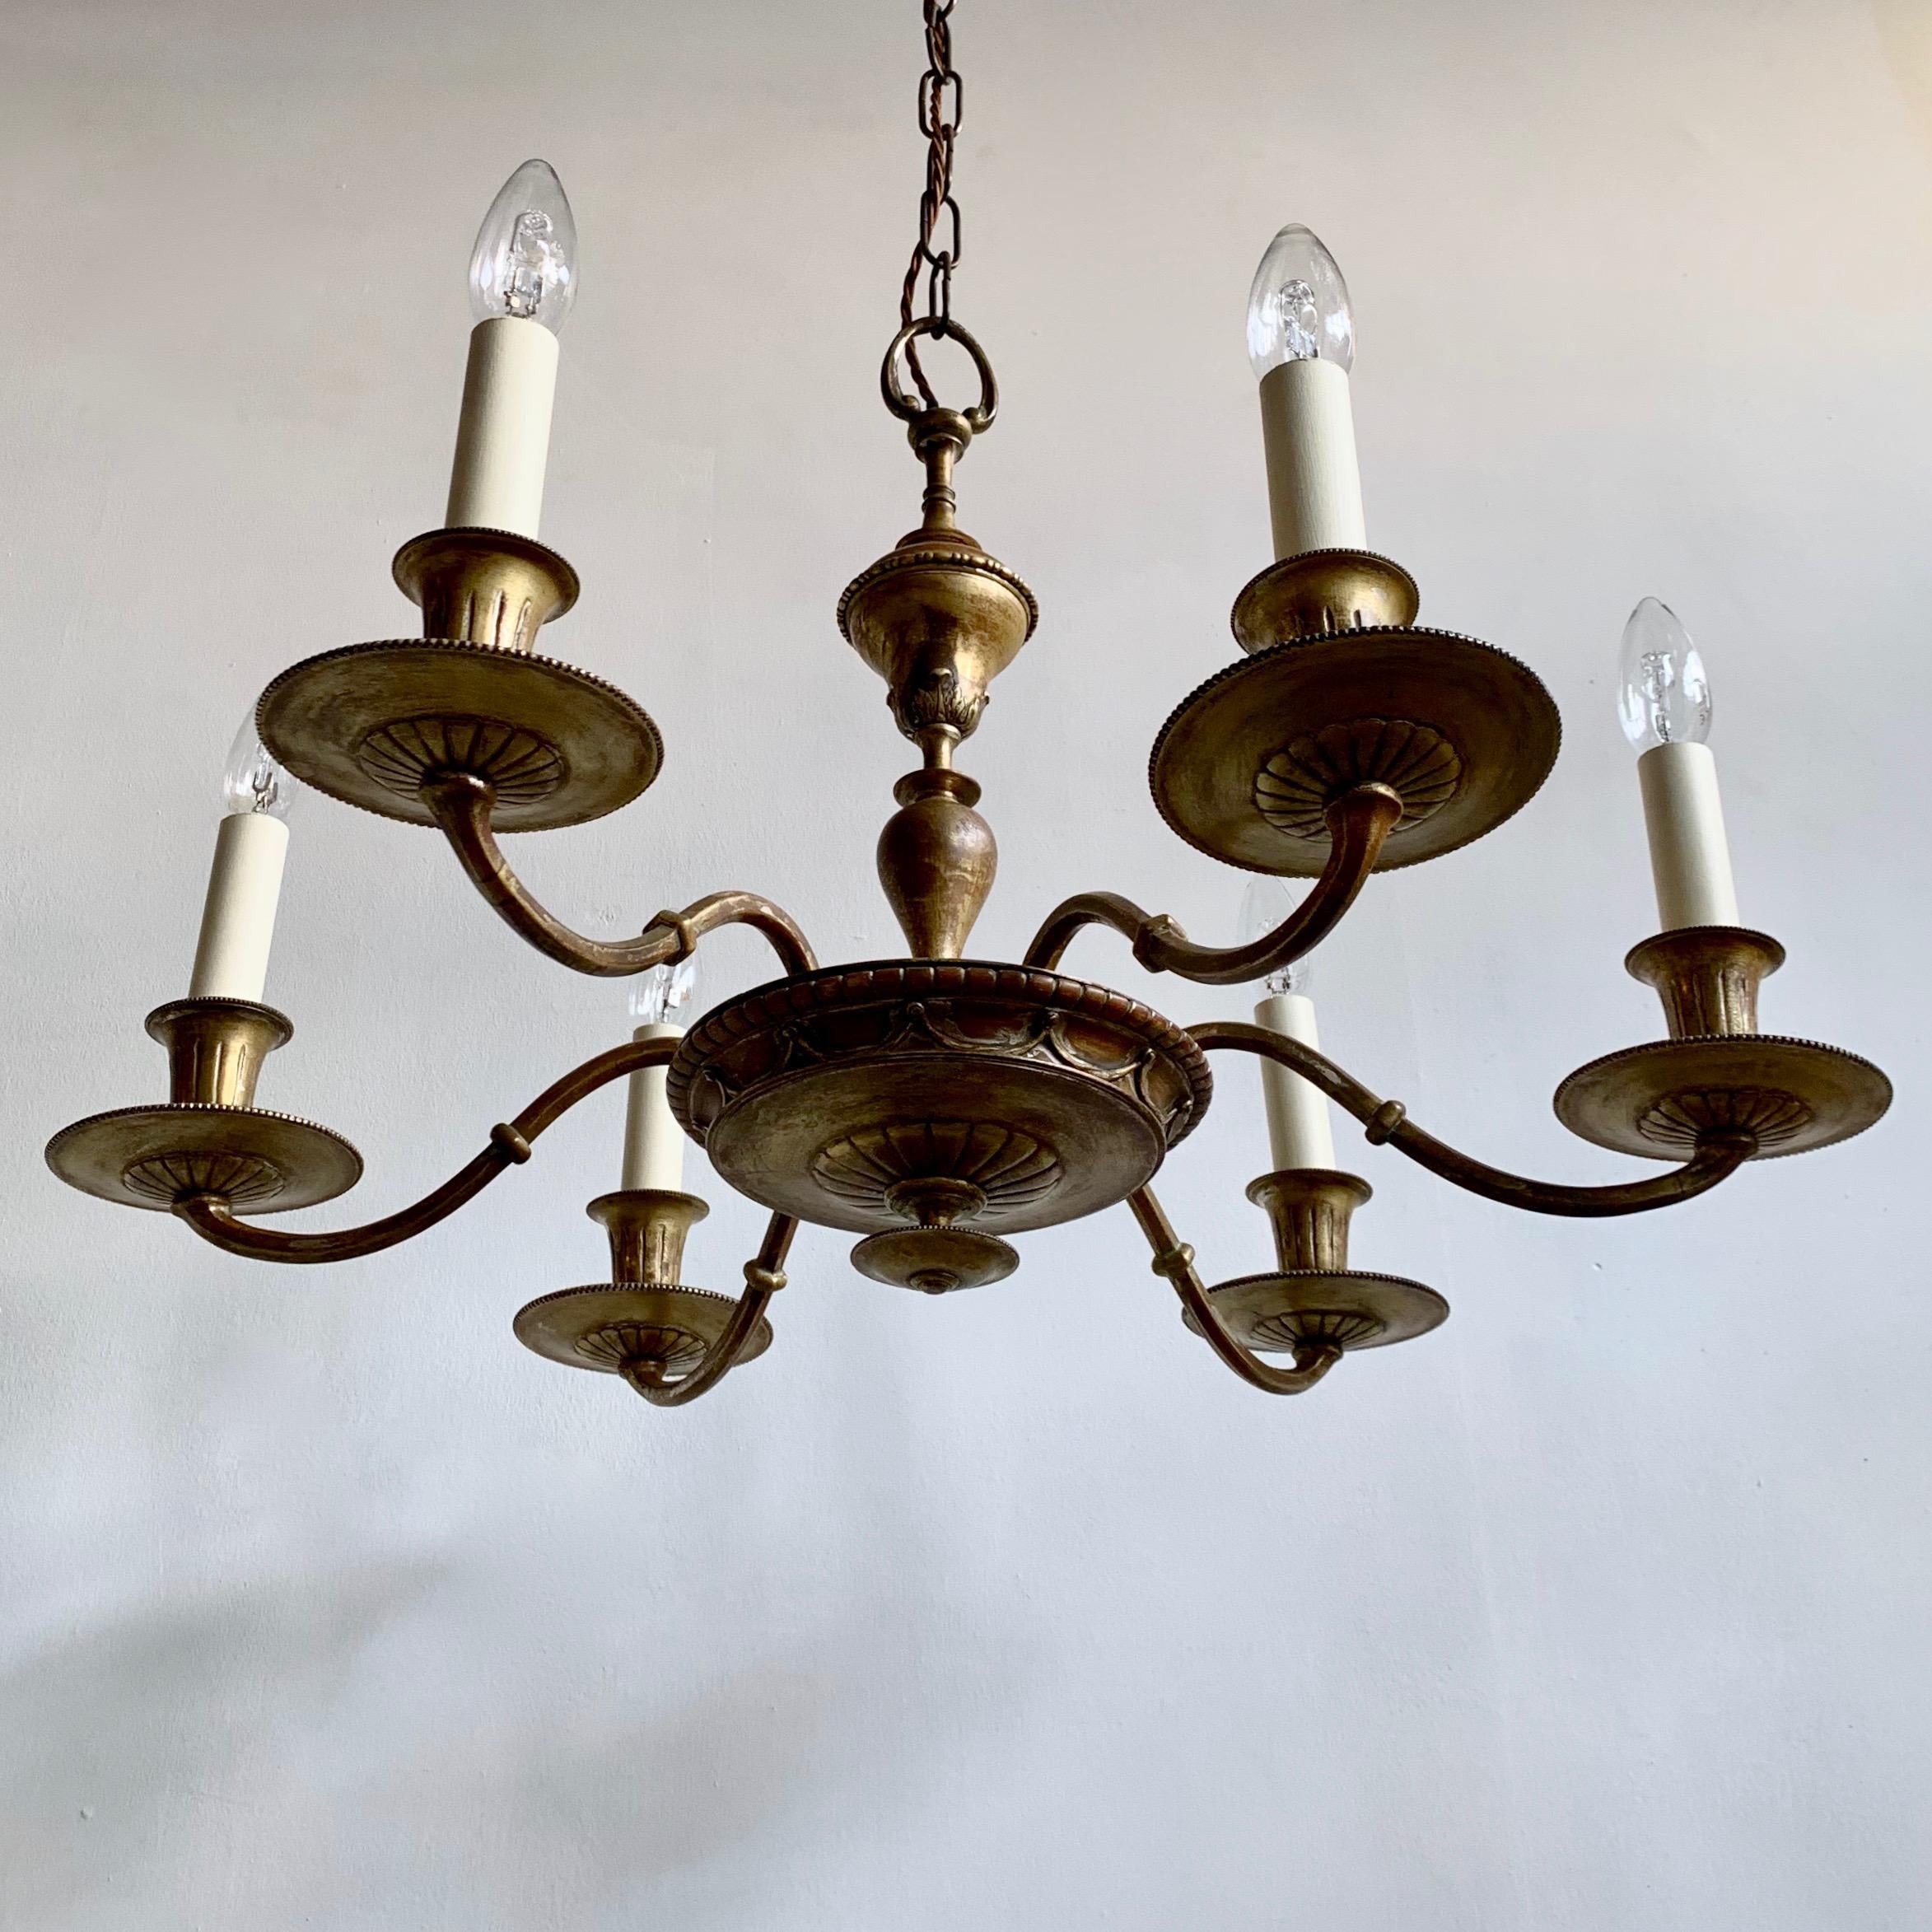 An English Decorative Brass Chandelier with six elegant arms. Converted from a candelabra this gilt brass chandelier dates from late 1800's to early 1900's. It was originally gilt which has worn off in places showing a warm burgundy colour